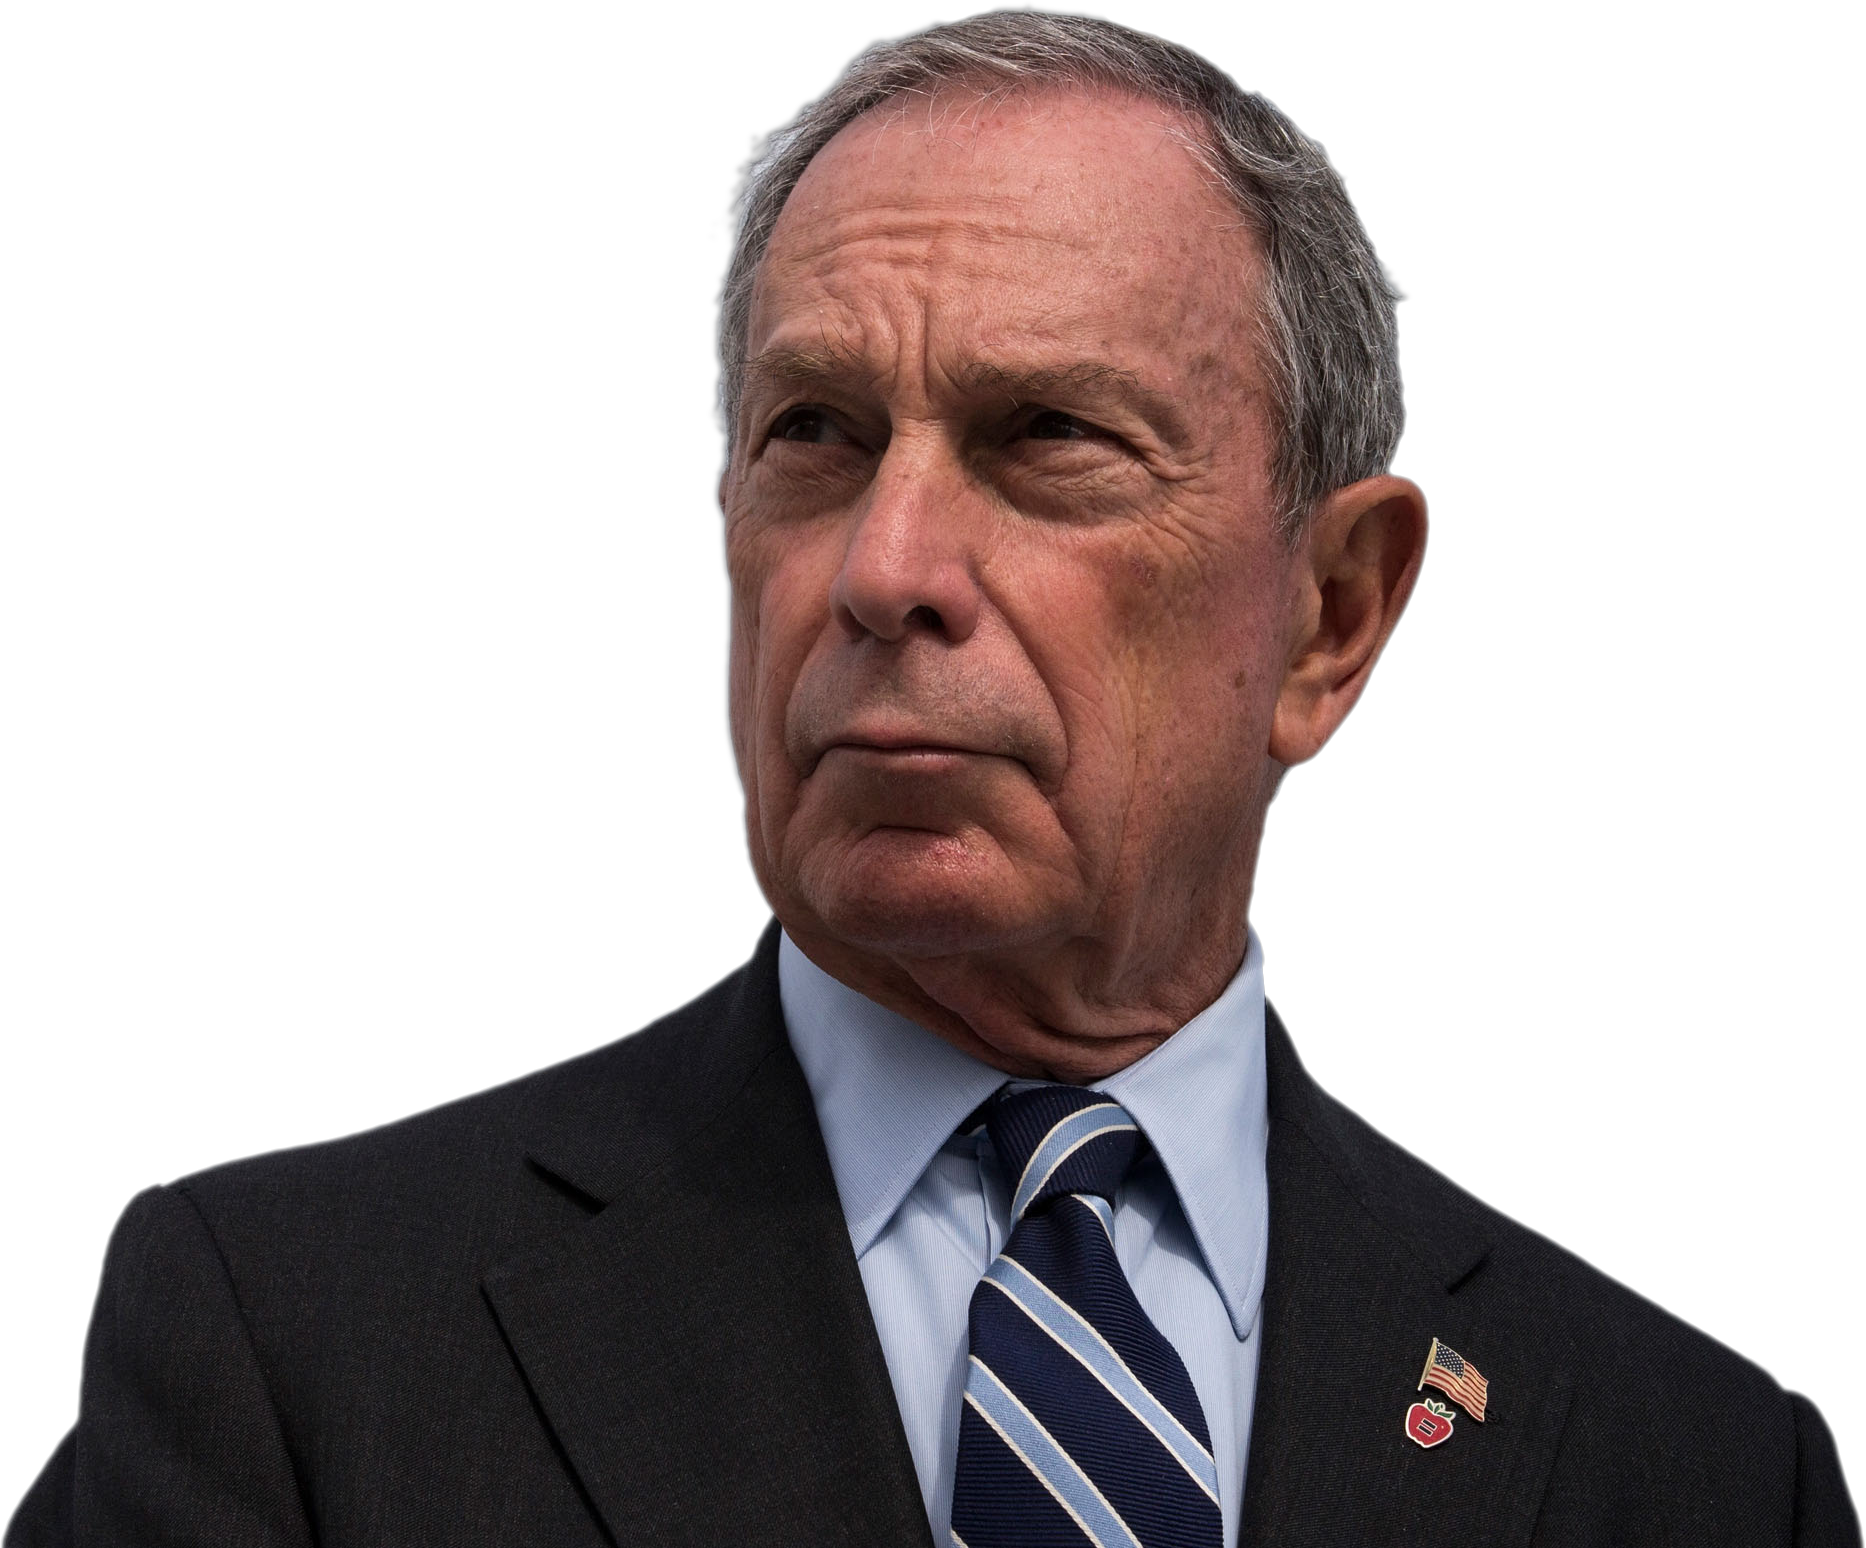 NC ALERT: Bloomberg drops another MILLION $$ in North Carolina